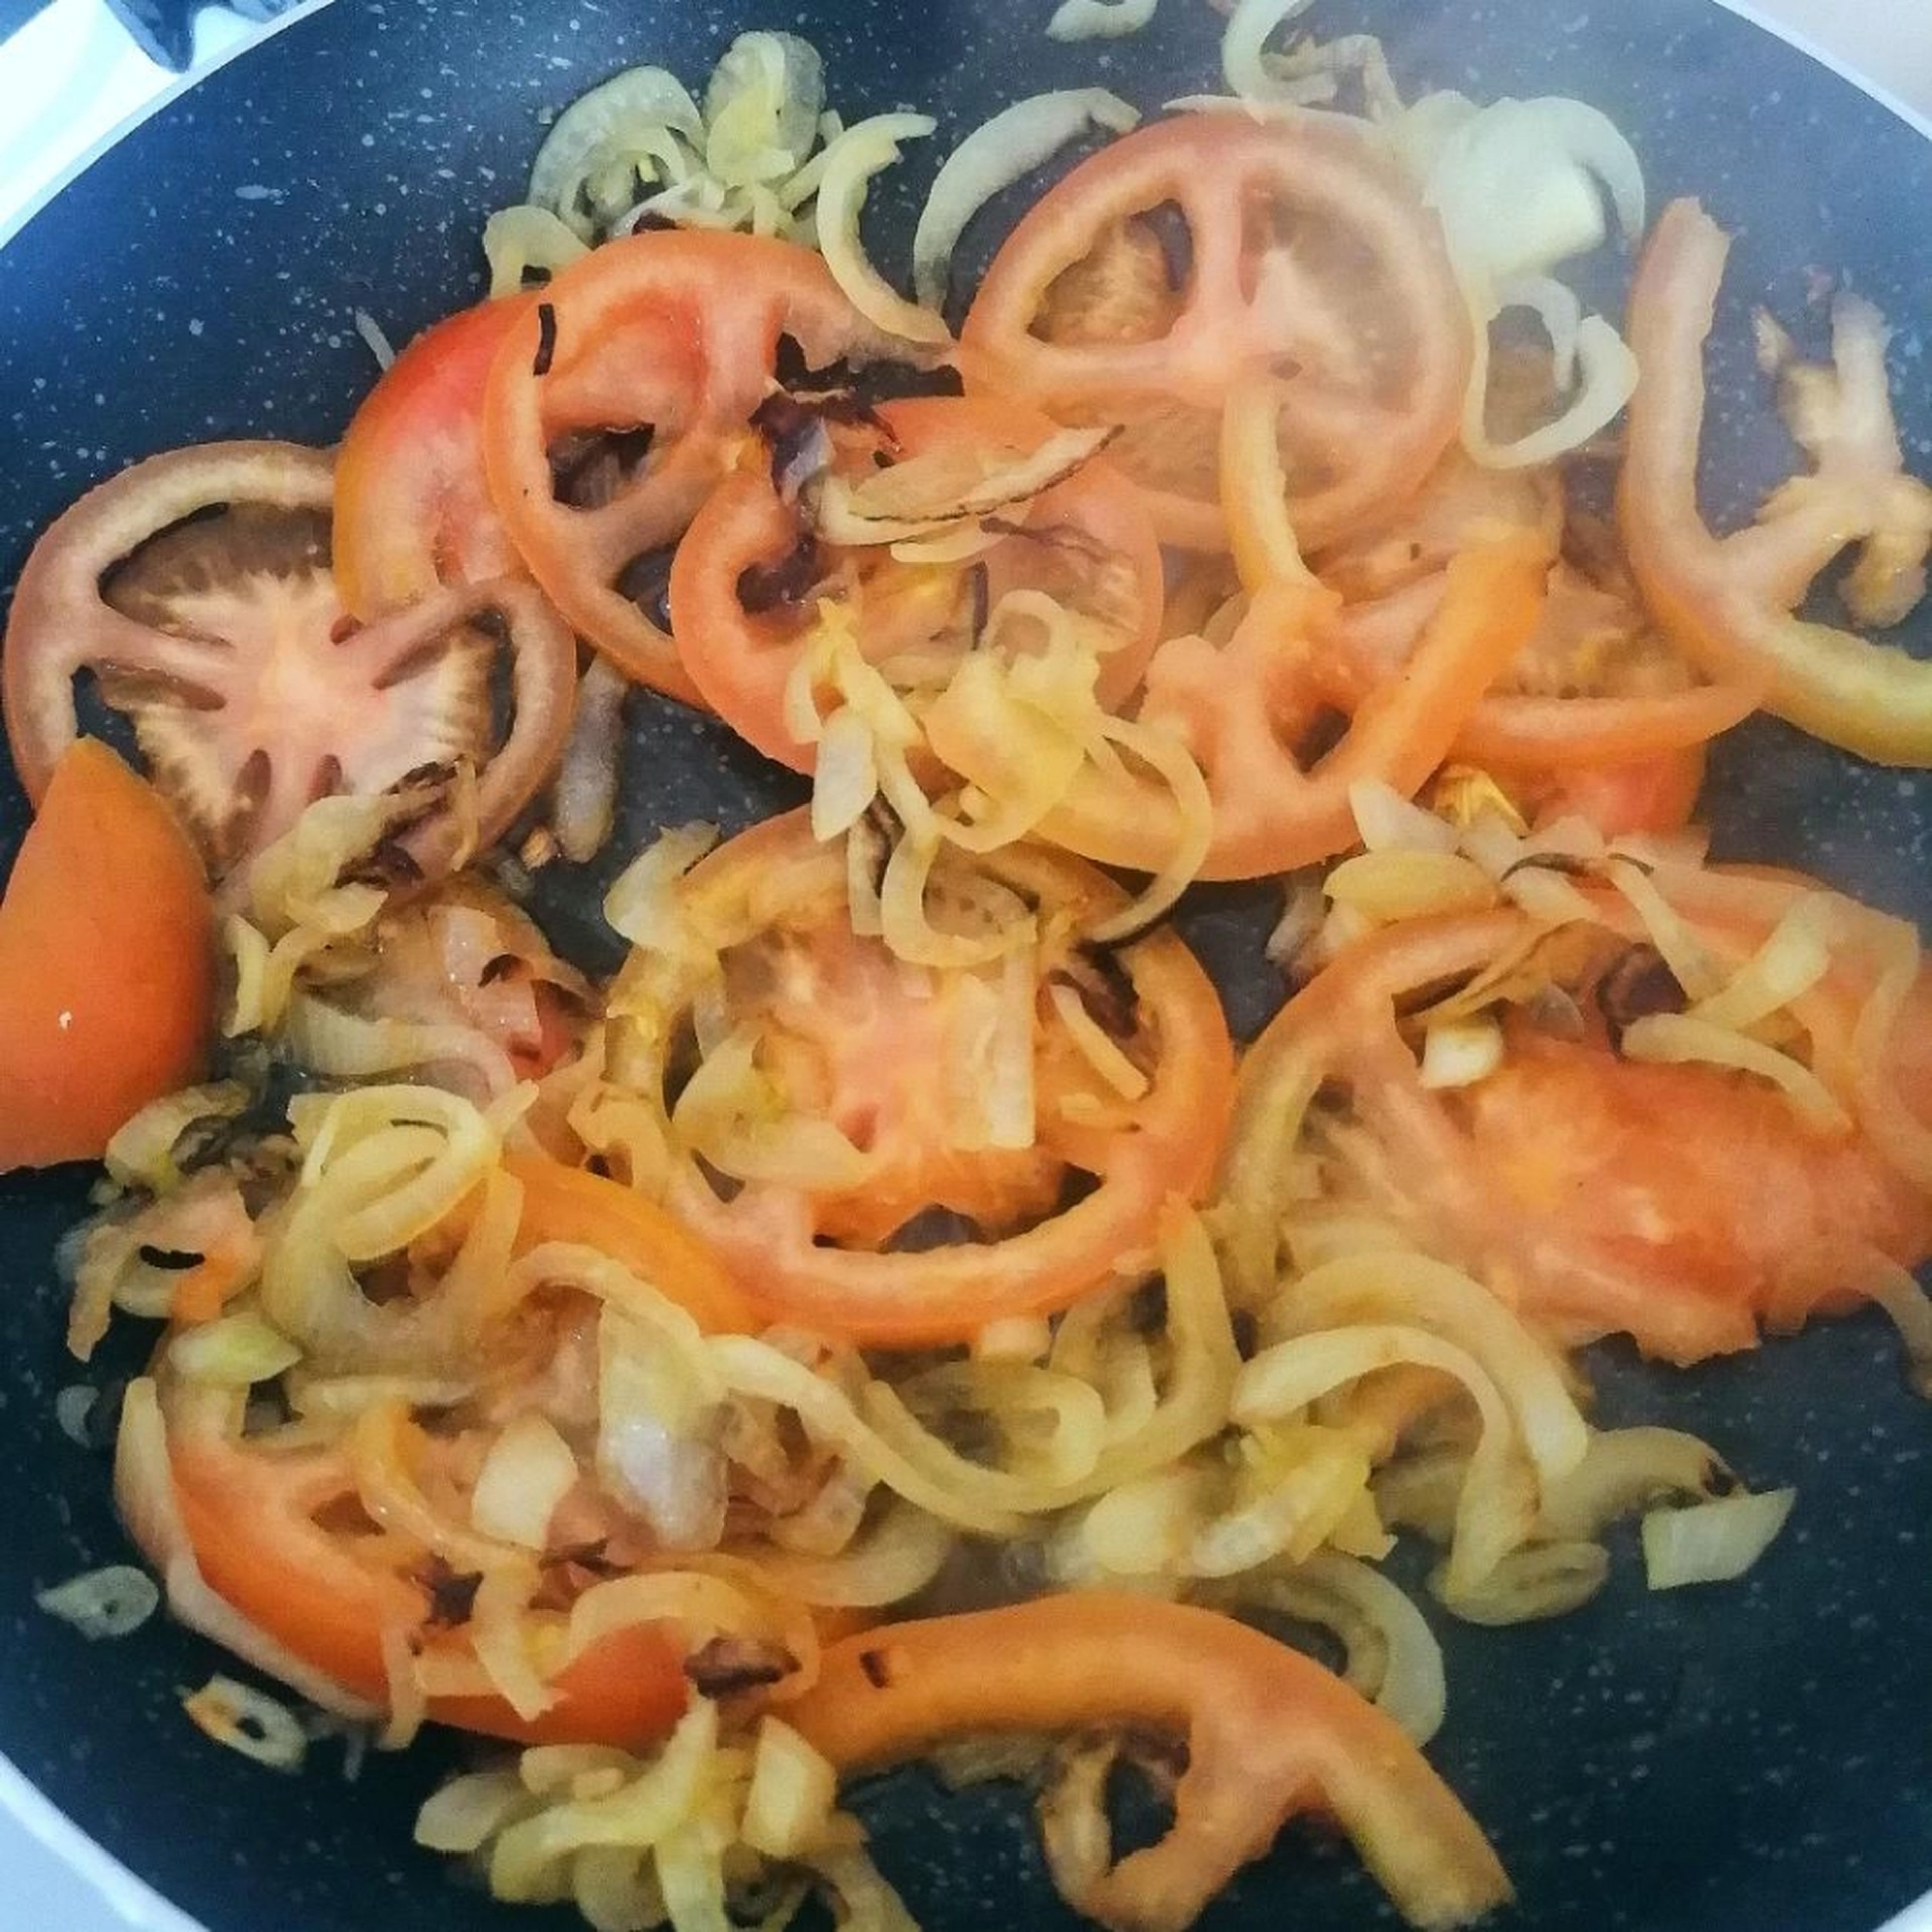 Heat the olive oil in a pan. Add the sliced onion and let it fry for 3 min. Add the tomato slices and keep them frying until they become soft.